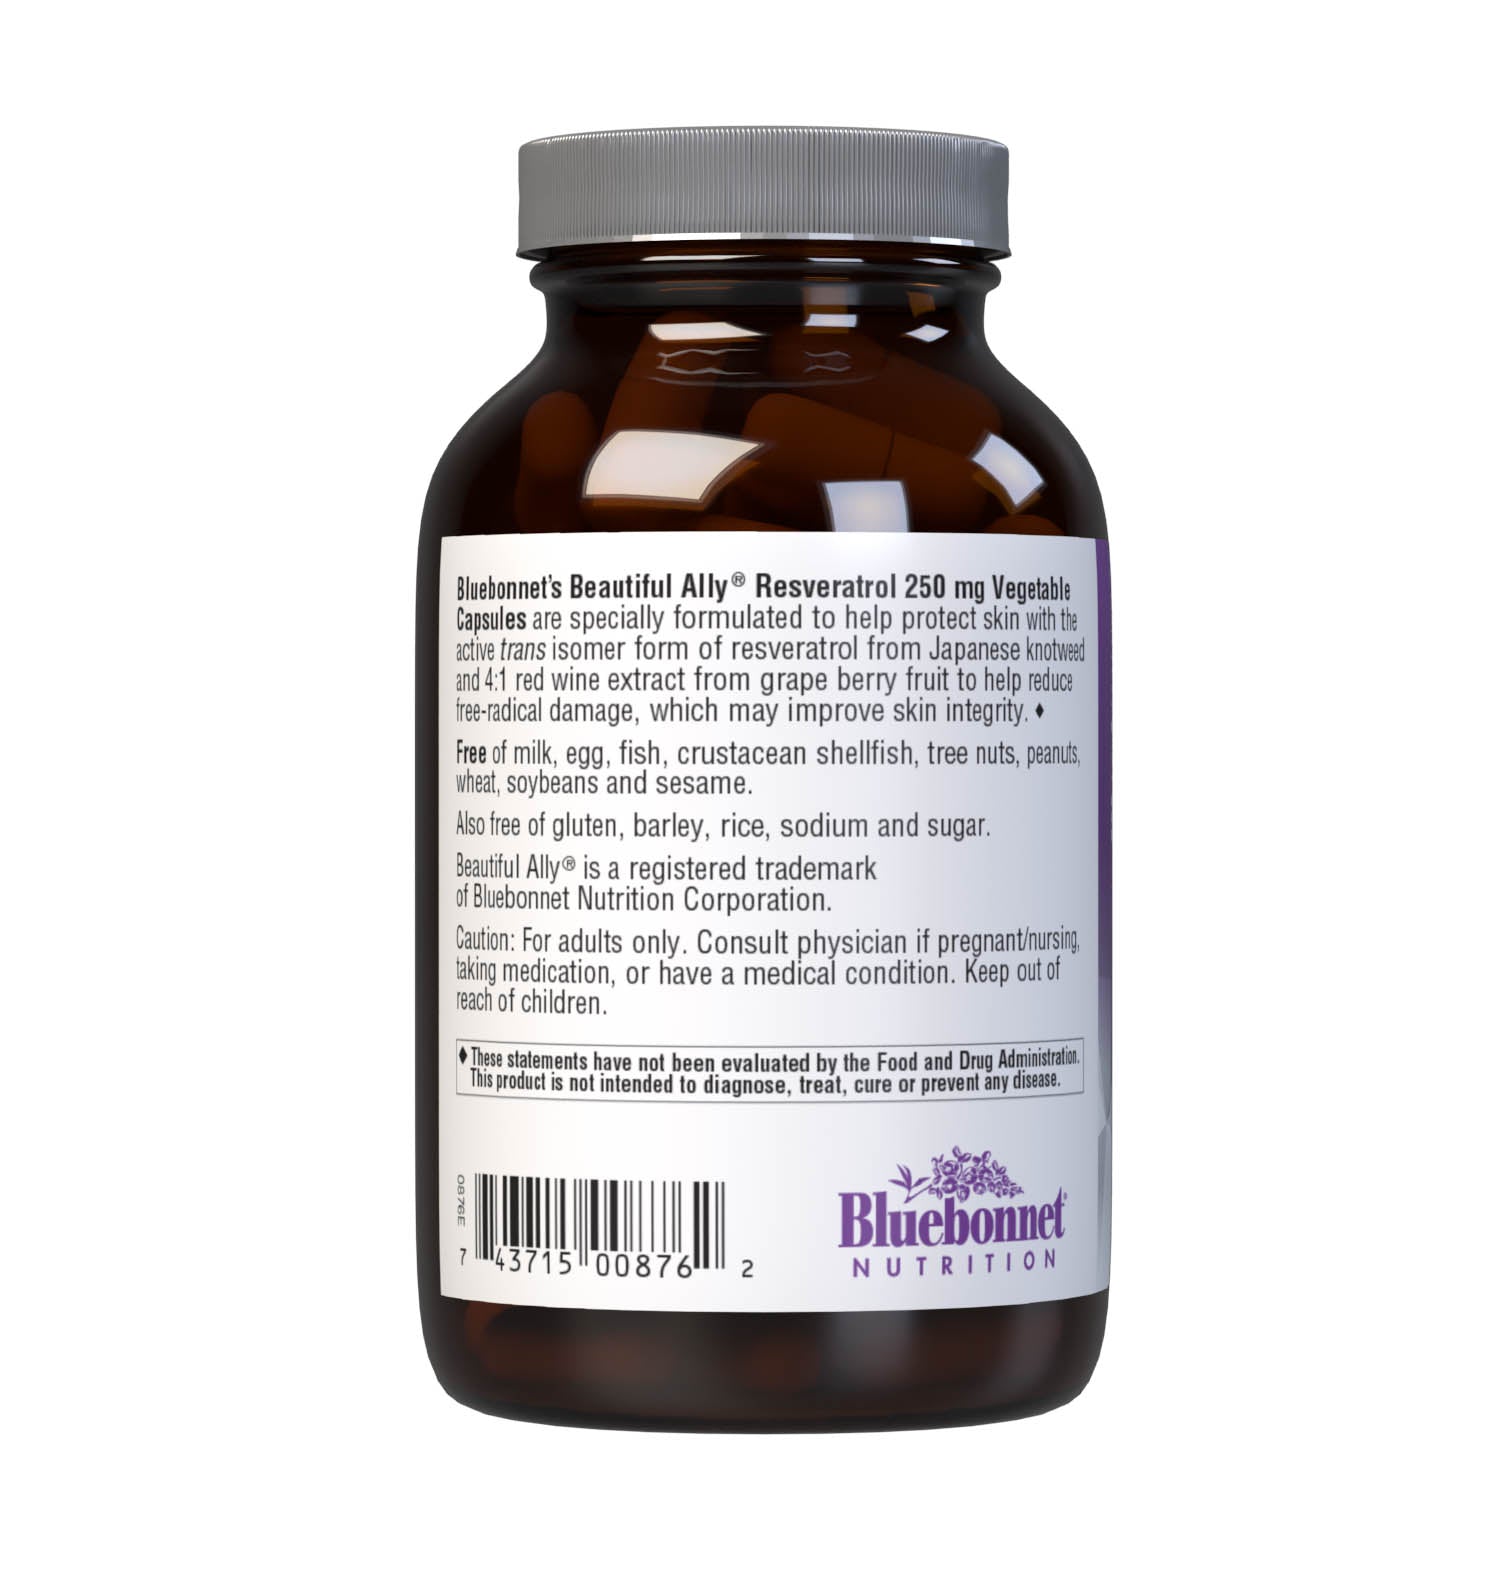 Bluebonnet’s Beautiful Ally Resveratrol 250 mg 30 Vegetable Capsules are specially formulated to help protect skin with the active trans isomer form of resveratrol from Japanese knotweed and 4:1 red wine extract from grape berry fruit to help reduce free-radical damage, which may improve skin integrity. Description panel. #size_30 count